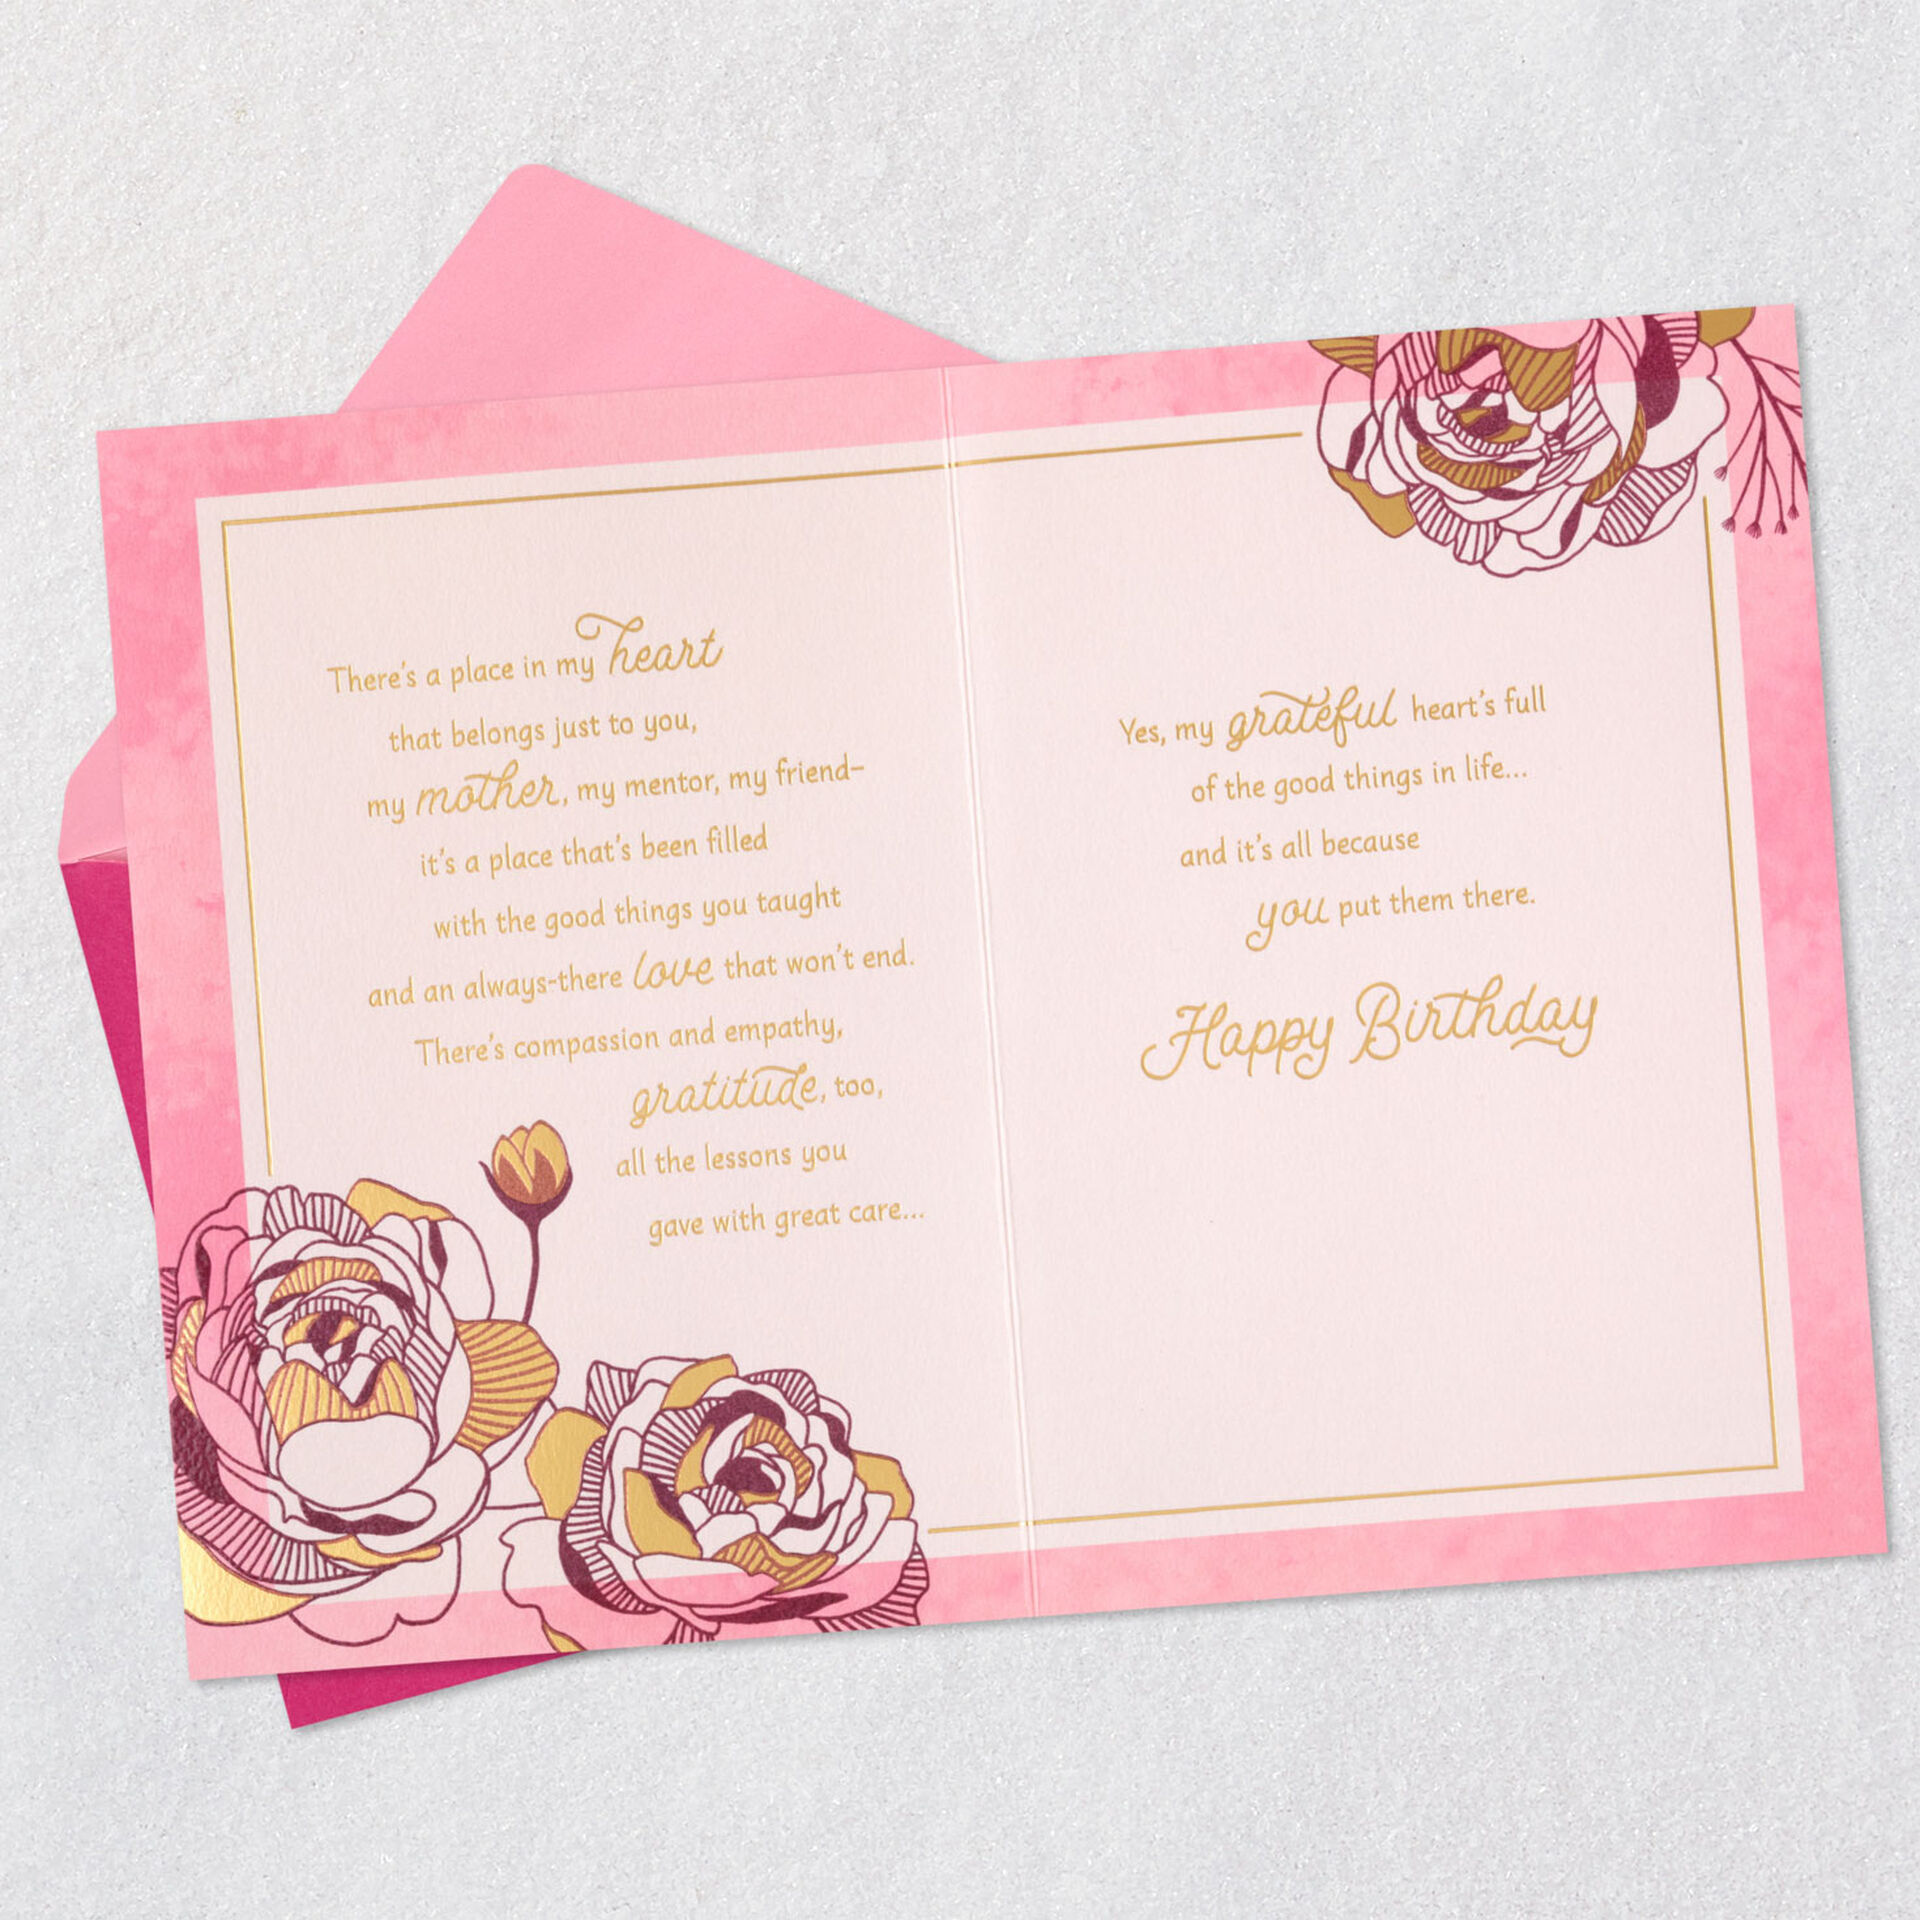 Birthday-Card-for-Mom-With-HeartShaped-Decoration_899FBD6003_04